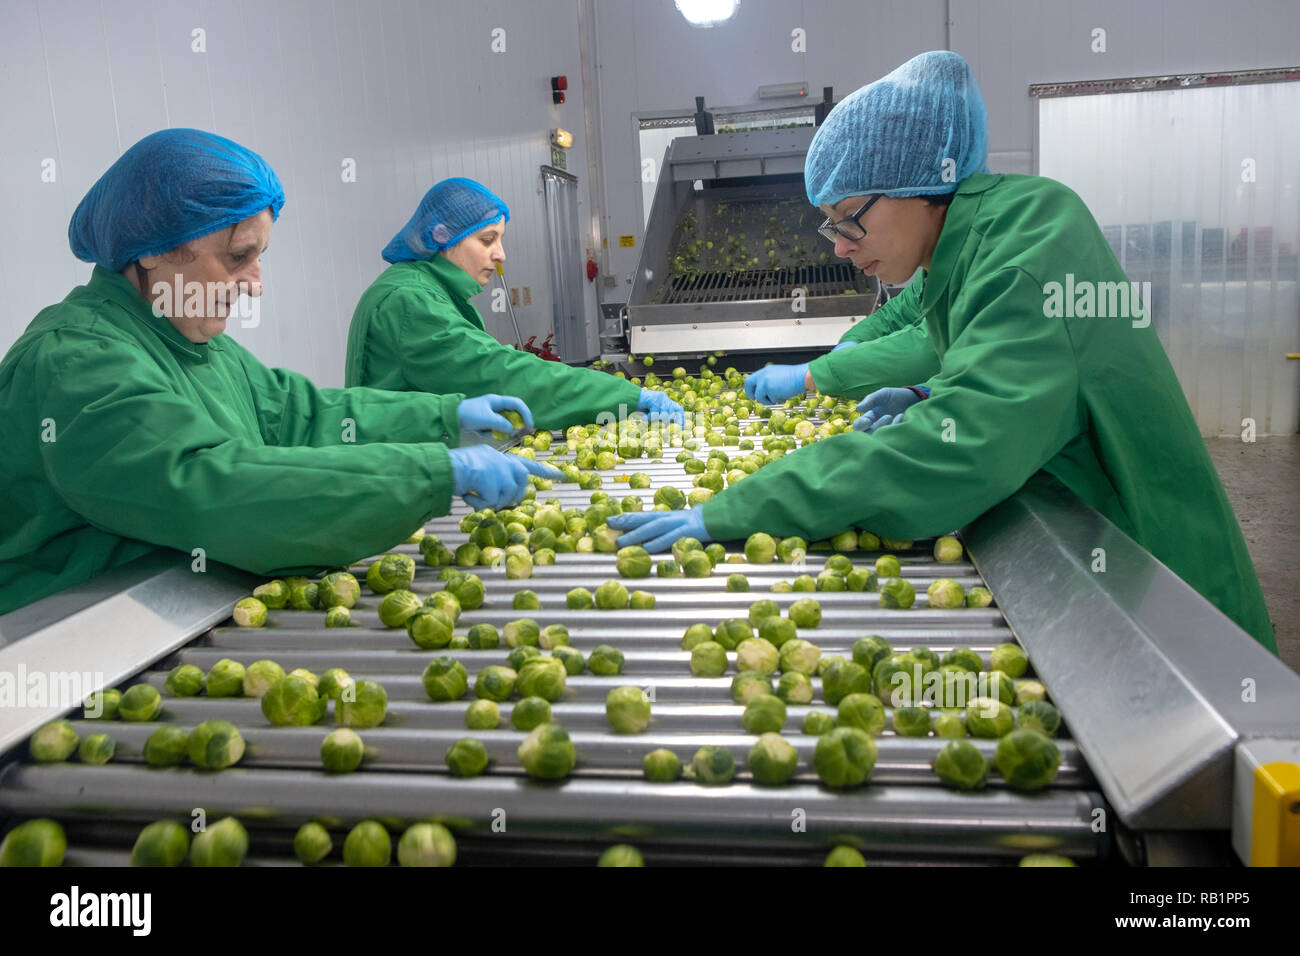 Production line of Brussel Sprouts in factory Stock Photo